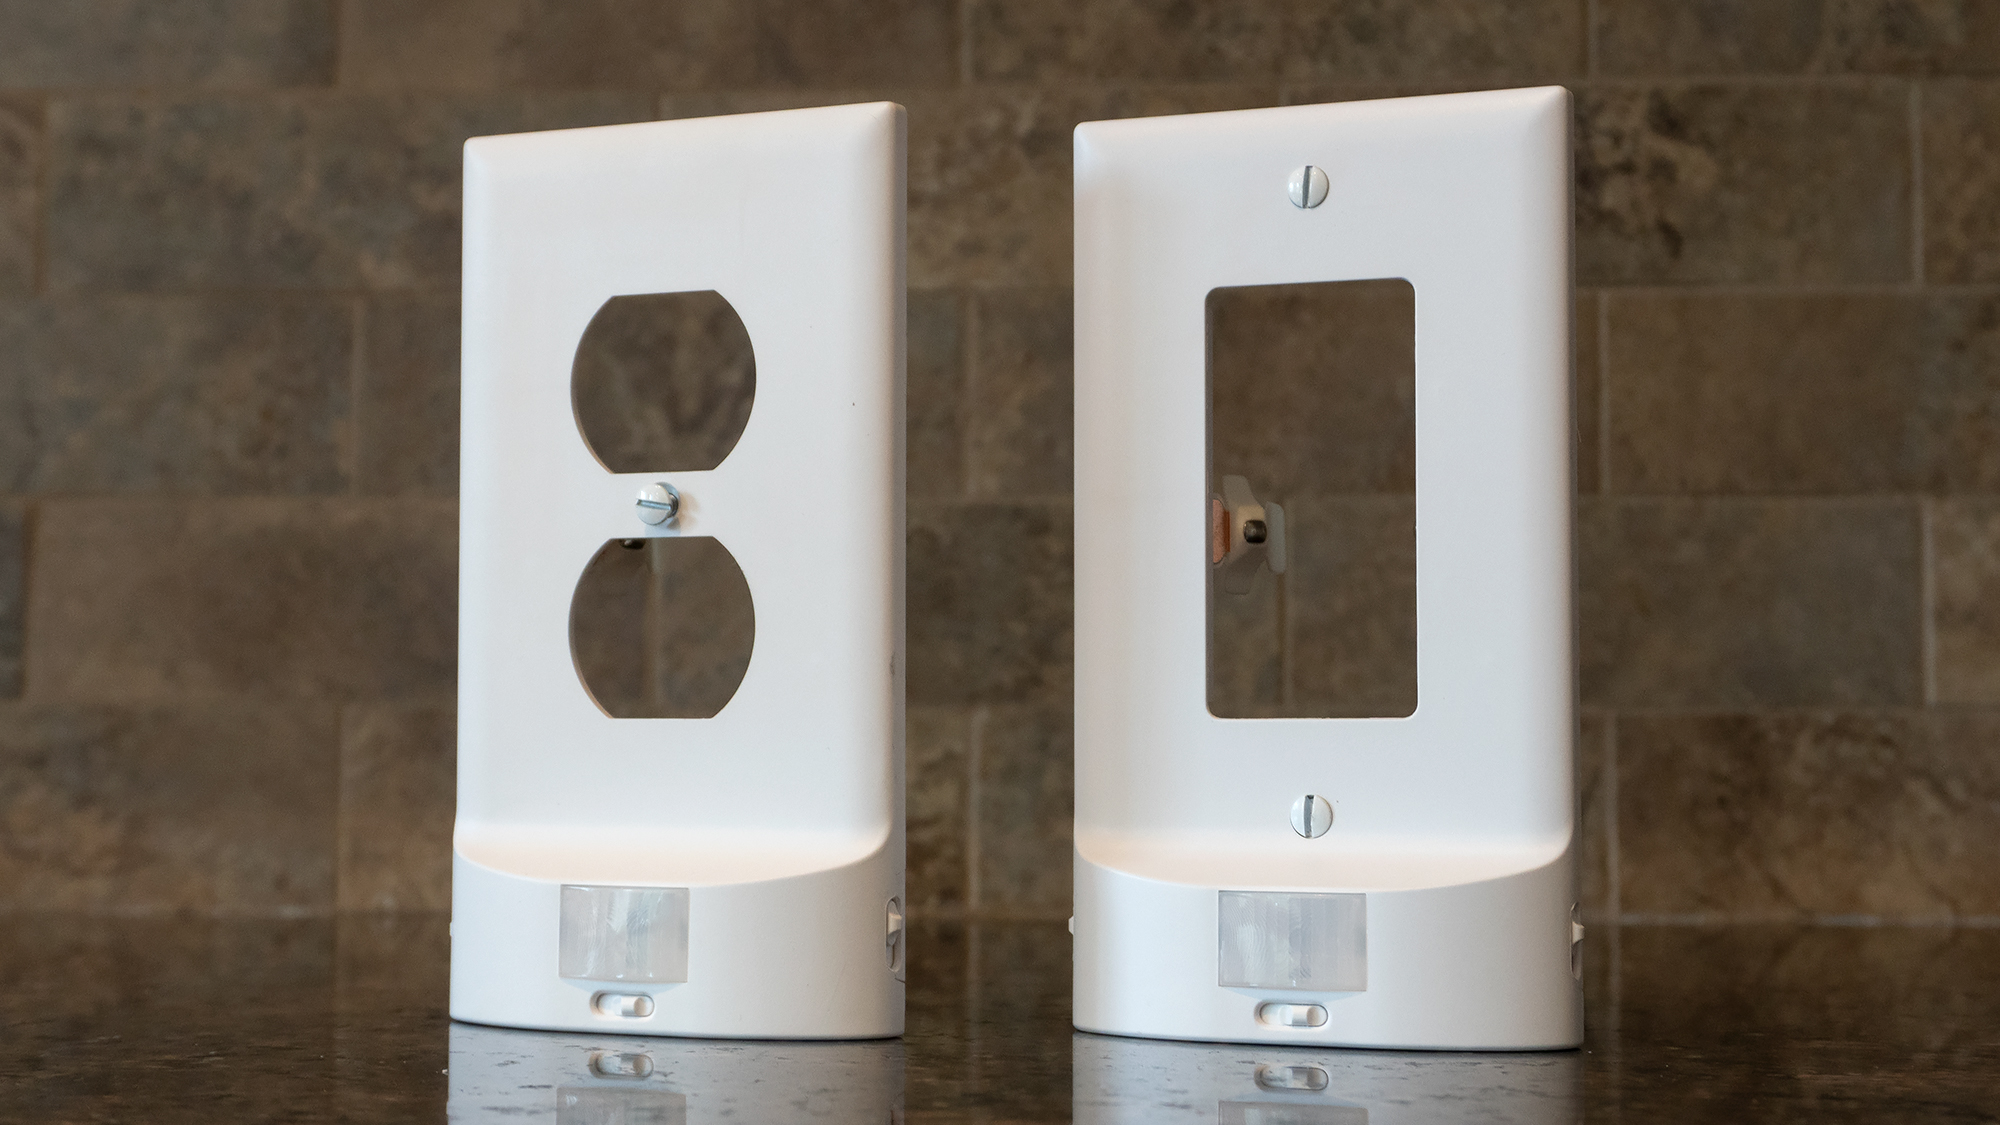 There are three versions of the SnapPower ConnectLight available: Duplex style (left), Decor style (right), and GFCI (not pictured) for bathrooms and kitchens.  (Photo: Andrew Liszewski/Gizmodo)